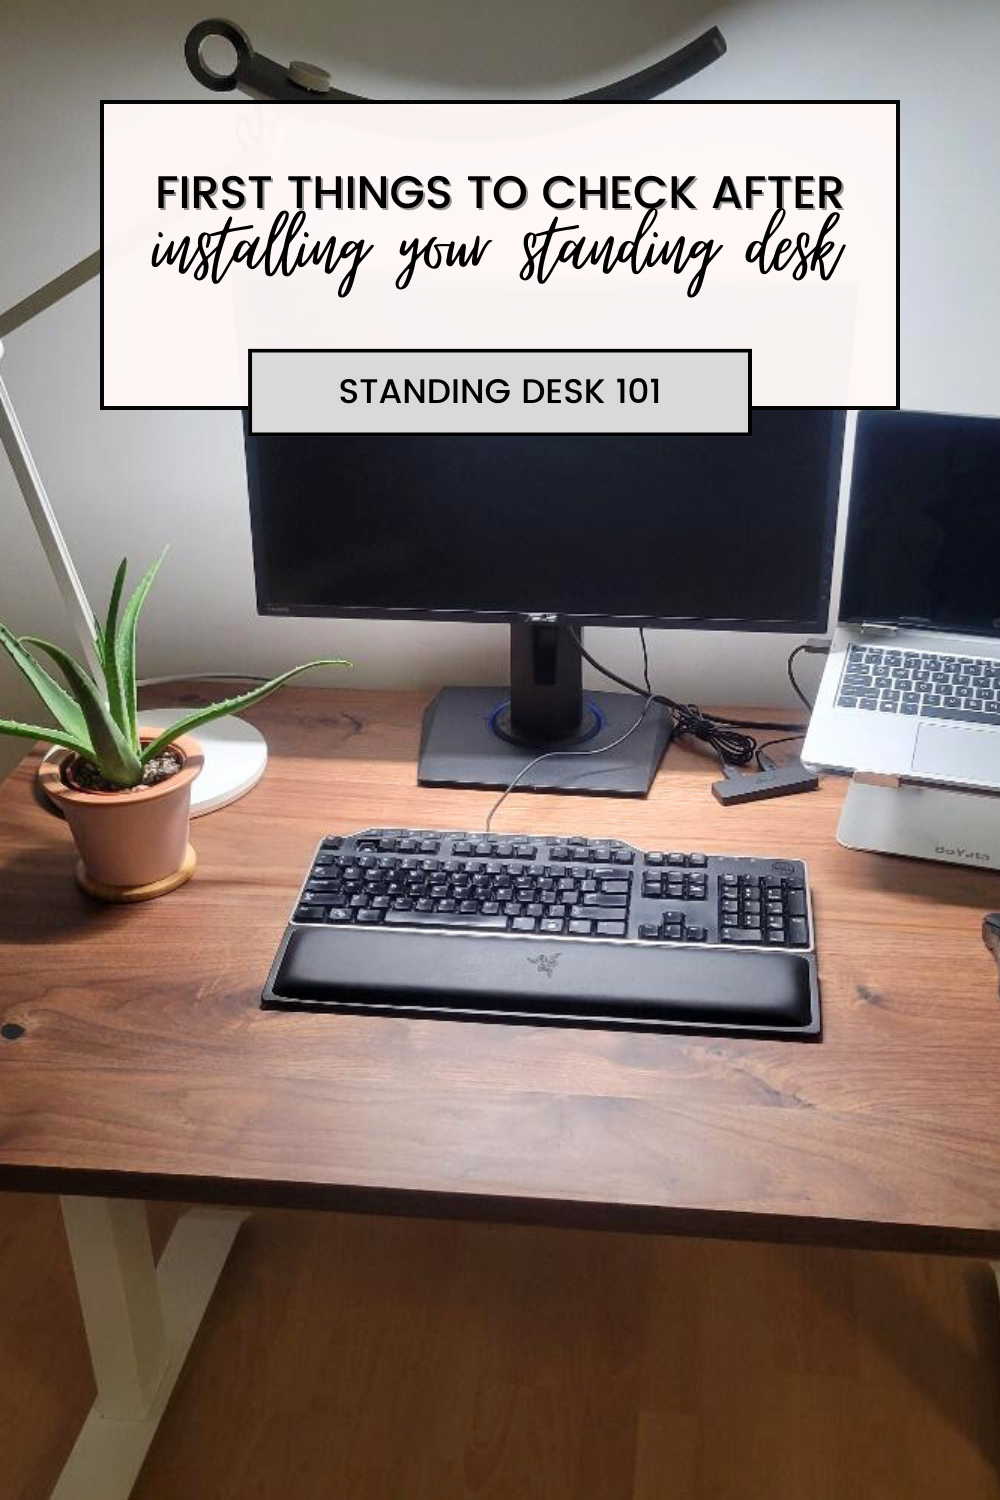 A standing desk set up is shown. This article covers the first things to check after installing your standing desk.